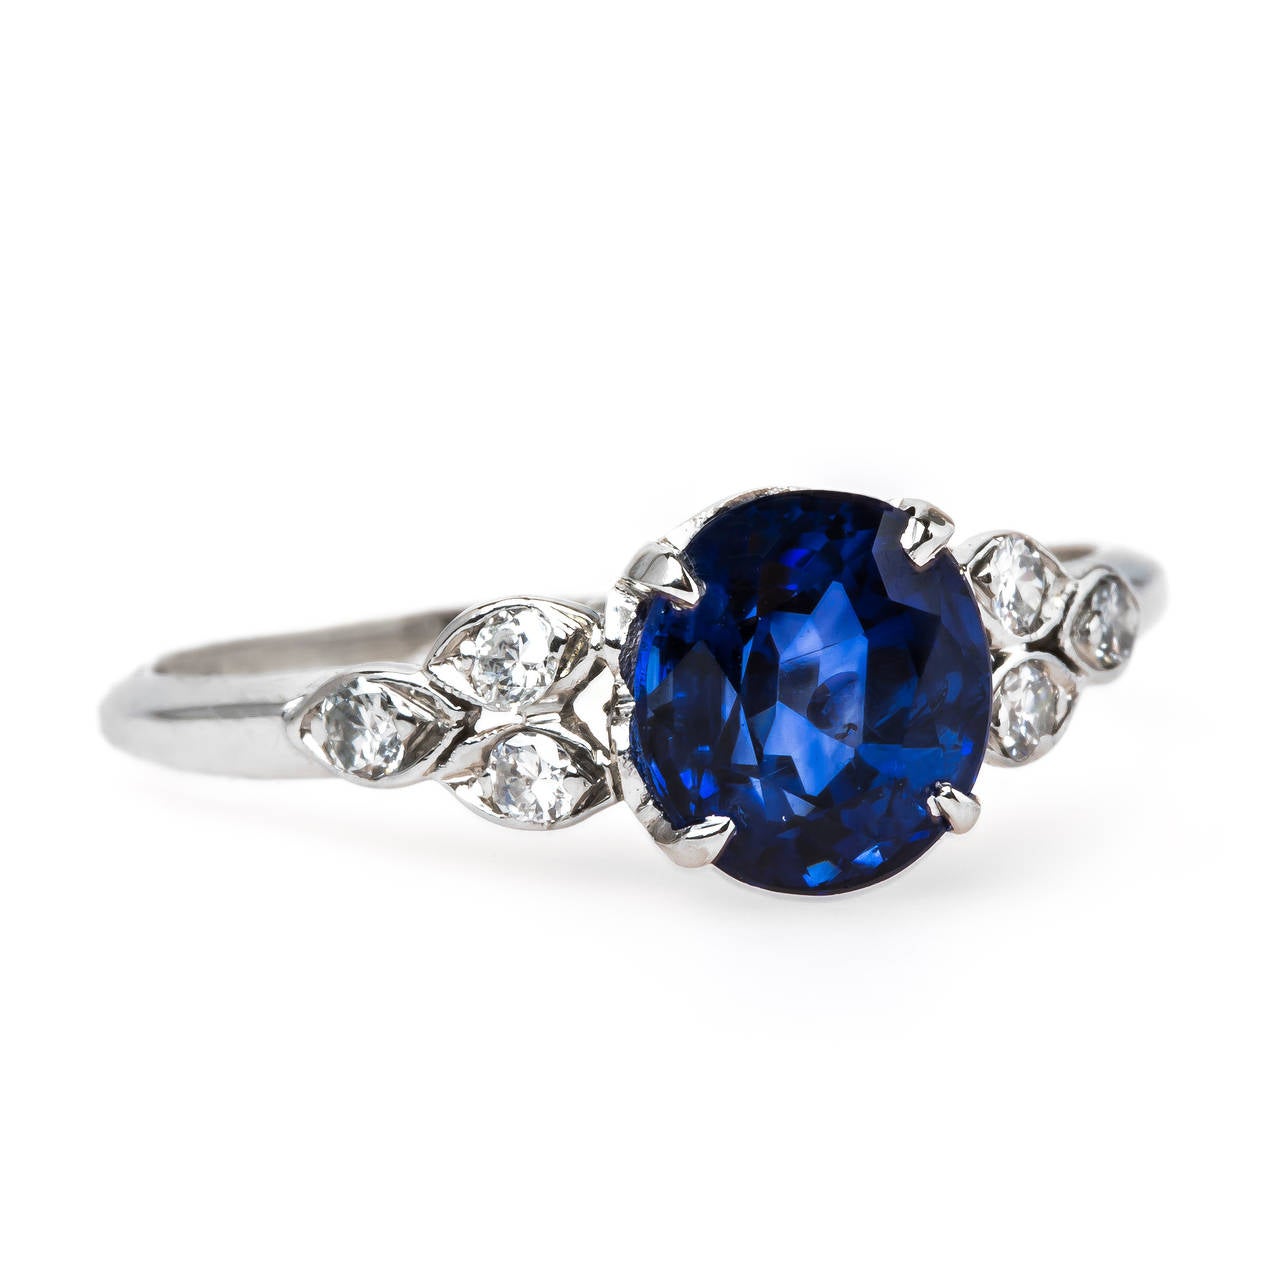 Sea Breeze is a dreamy authentic Mid Century (circa 1950) platinum engagement centering a 2.19ct Oval Sapphire accompanied with a Guild Laboratories certificate stating the sapphire is heated with Ceylon origin. Sea Breeze is further designed with a